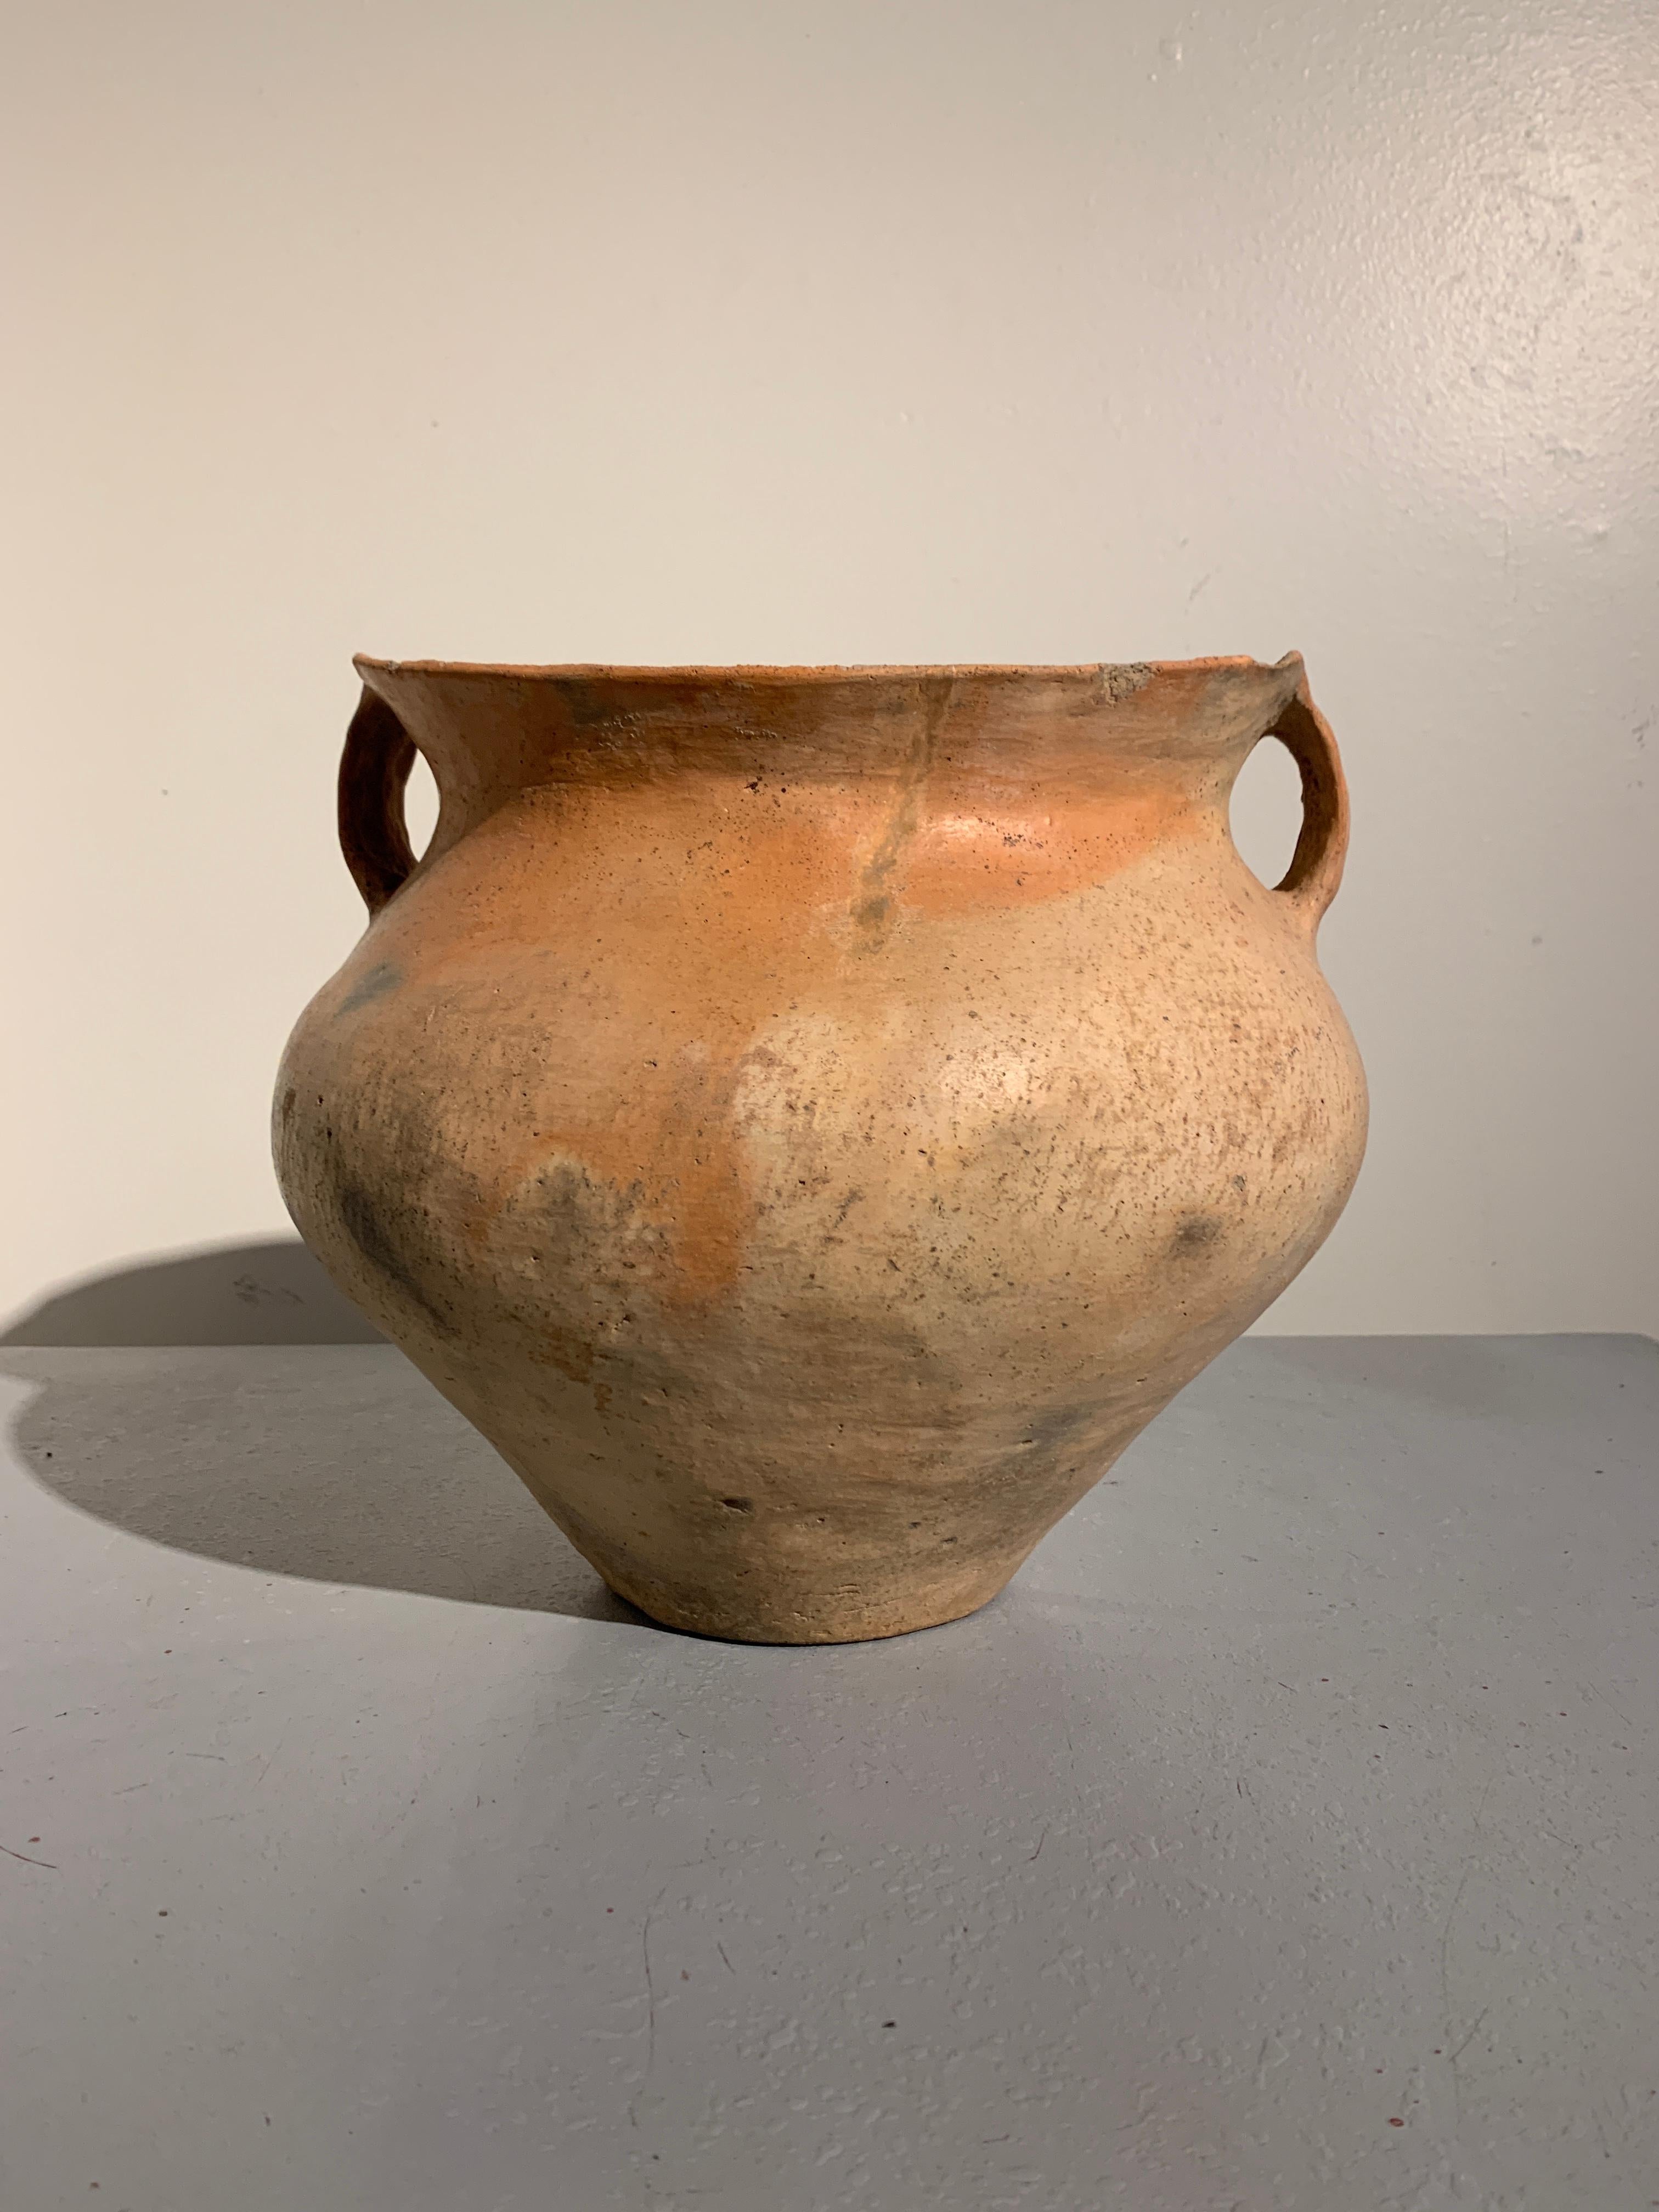 An alluring Chinese Neolithic Bronze Age pottery amphora vessel, Siwa Culture (14th-11th century BC), modern day Gansu Province, China.

The large pottery vessel of sensuous form, with a wide, flaring saddle shaped mouth and a pair of strap